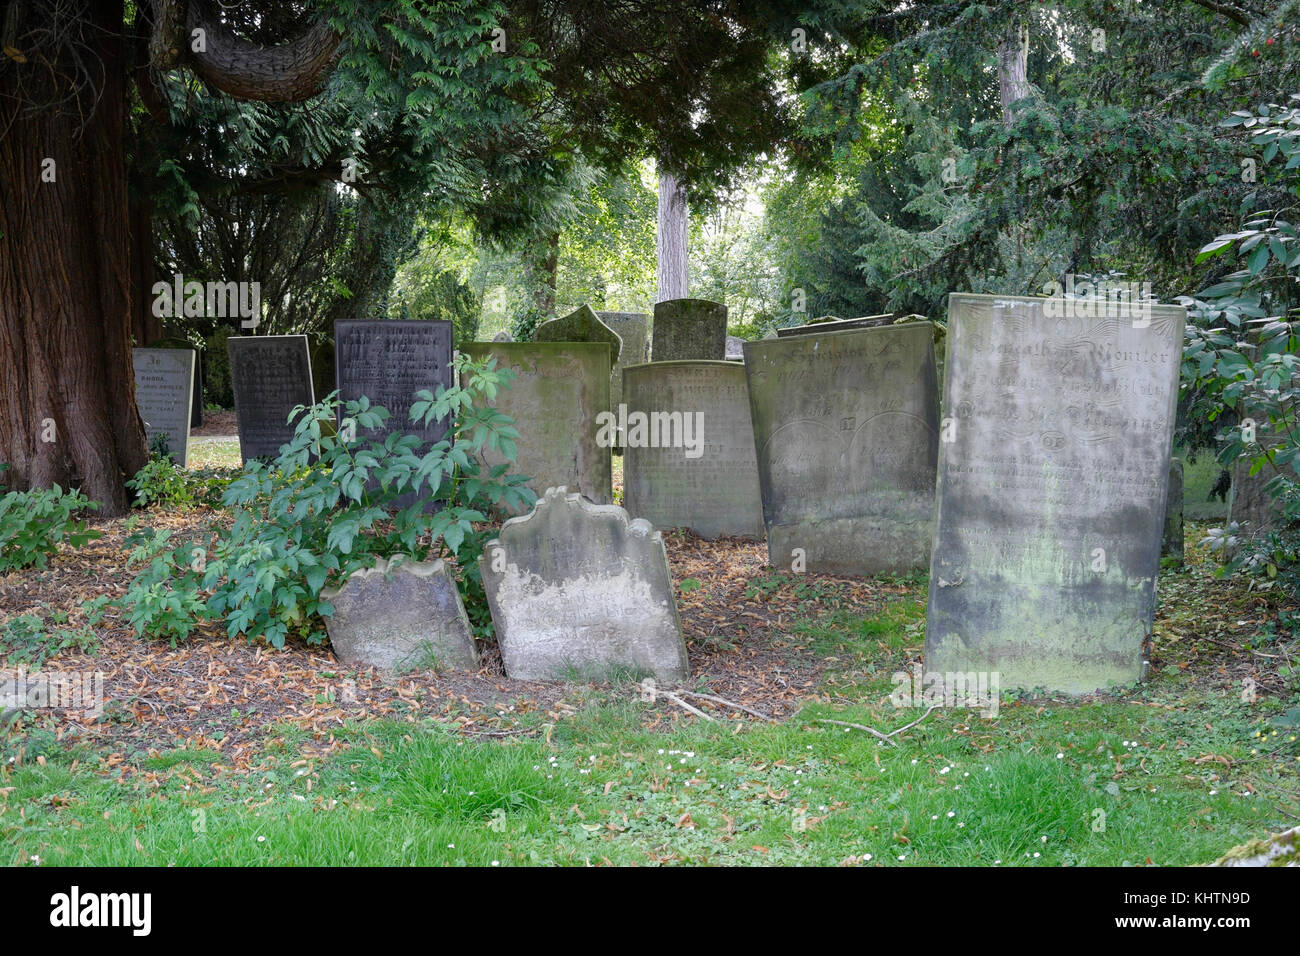 Graves under a Yew tree, St Helens church, Darley Dale, Derbyshire, England, UK Stock Photo